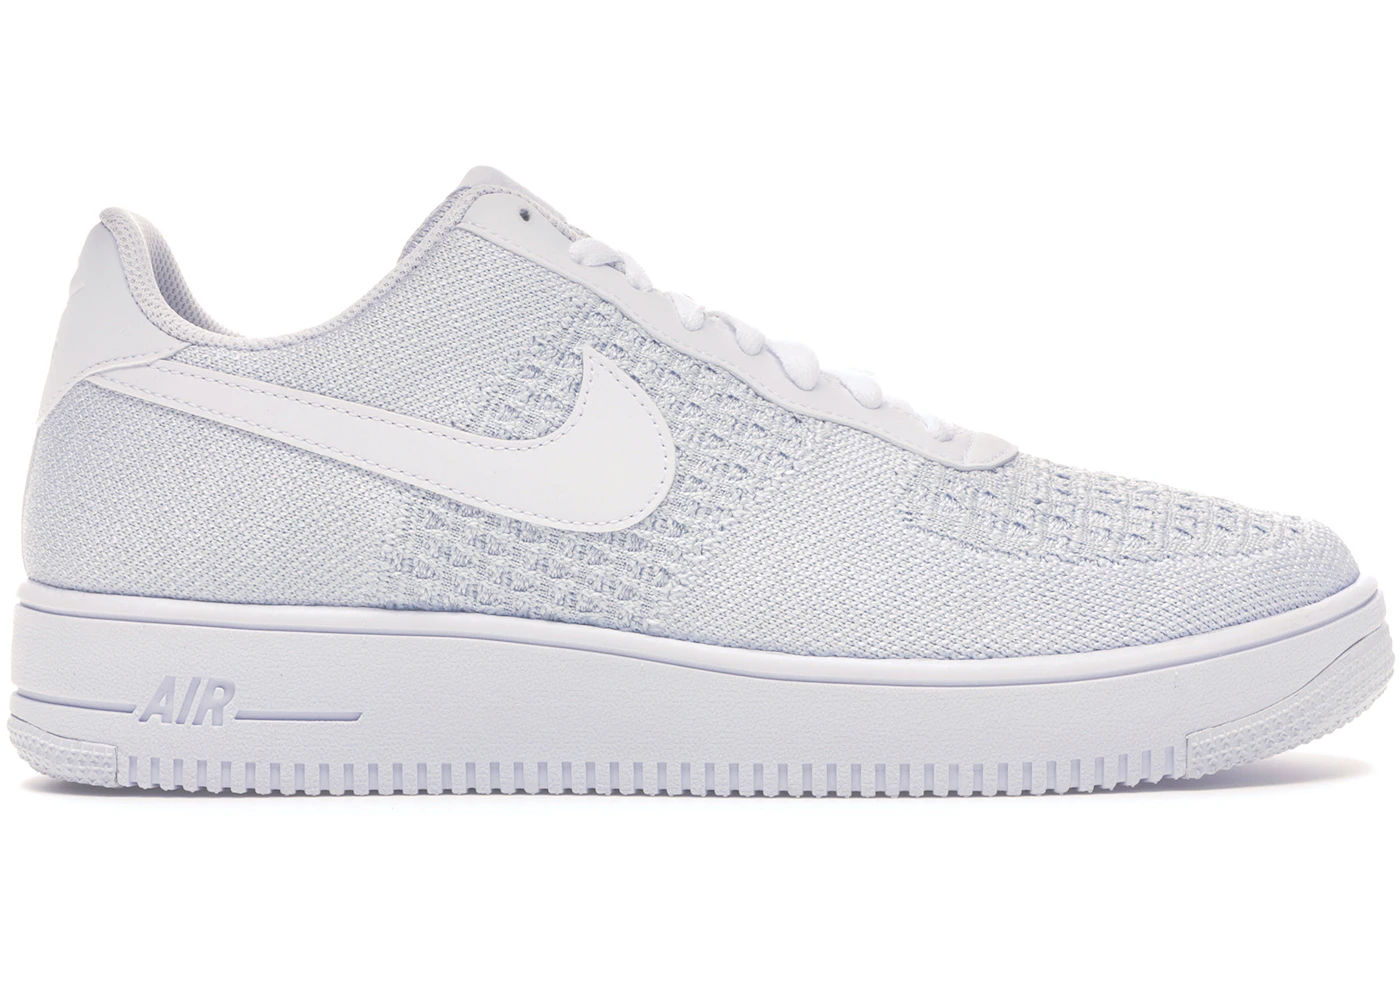 mourning bound Civilize Nike Air Force 1 Flyknit 2 White Pure Platinum - AV3042-100 - US